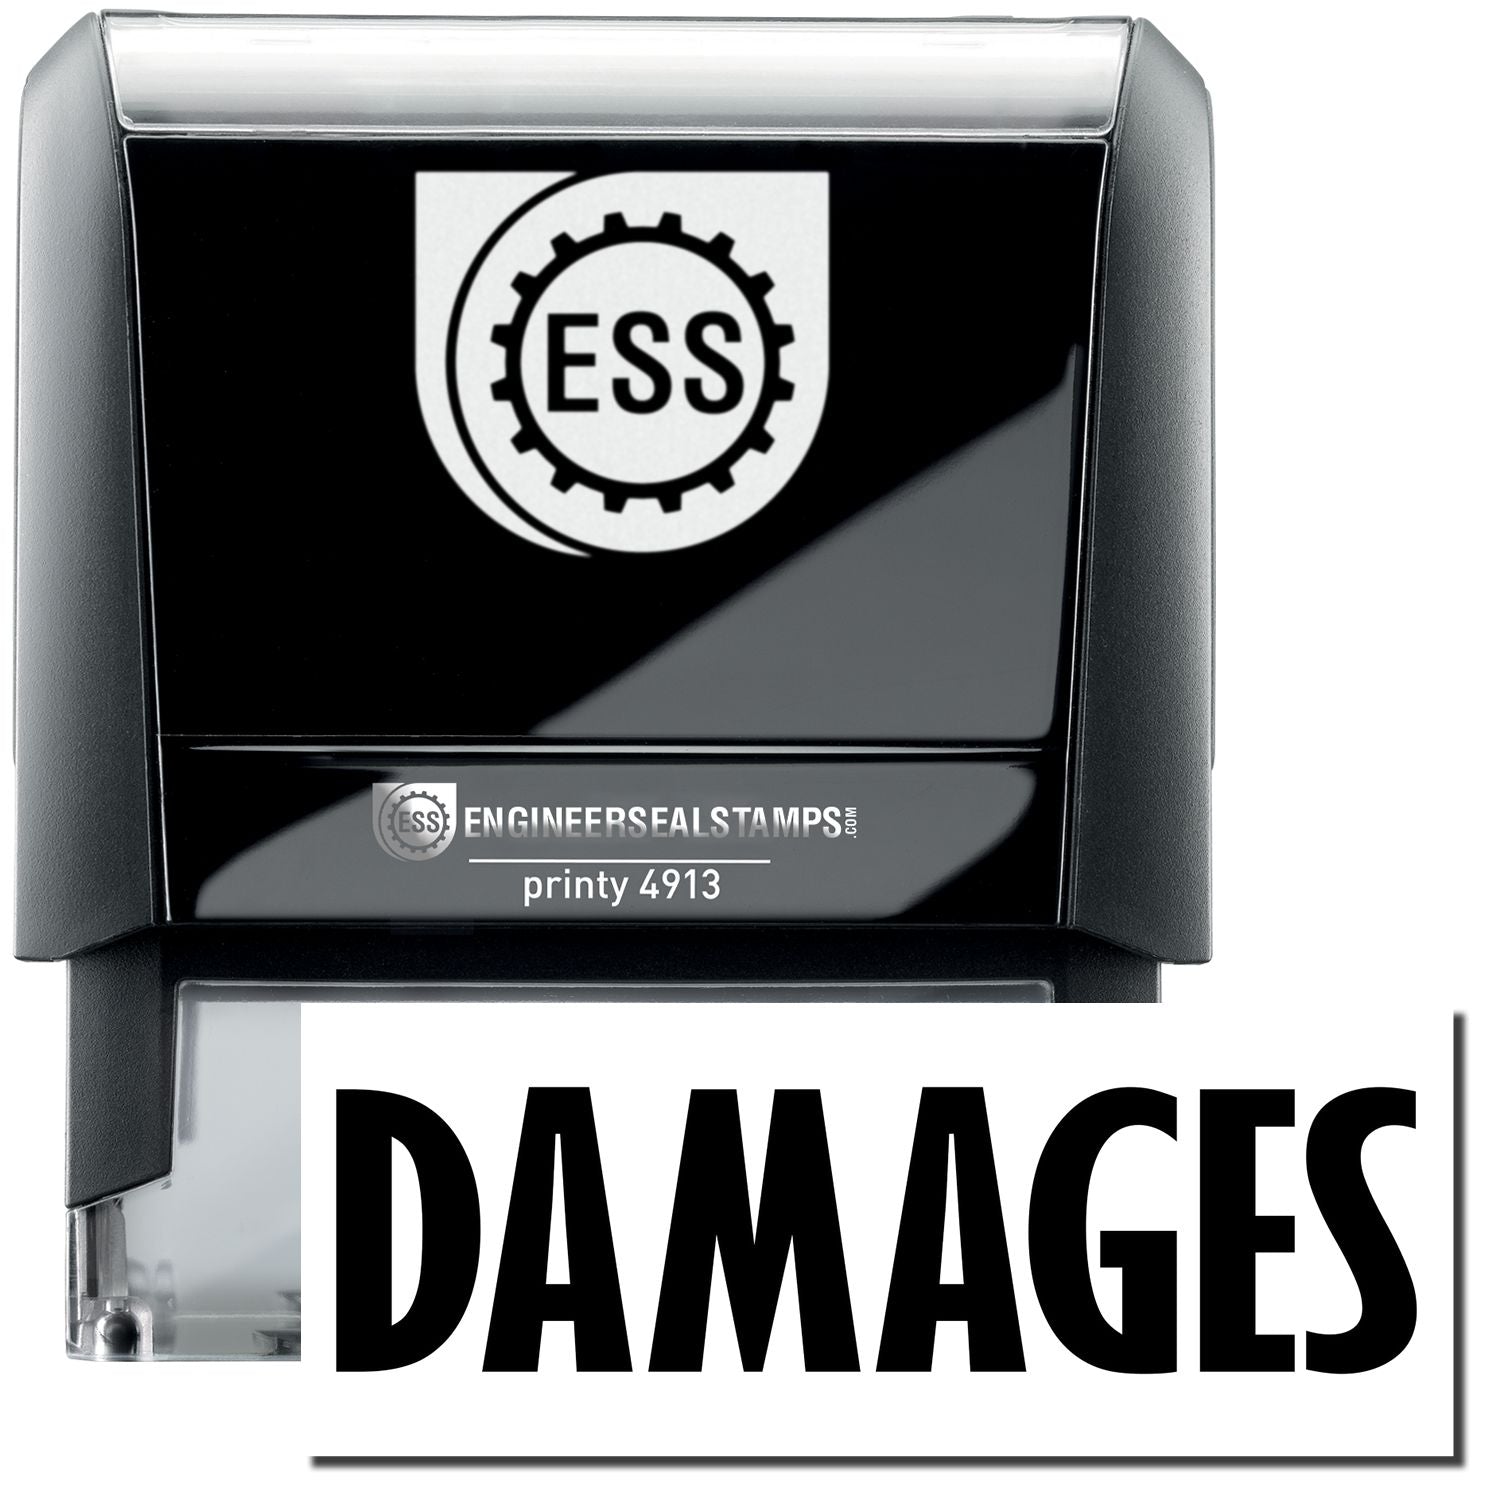 A self-inking stamp with a stamped image showing how the text "DAMAGES" in a large bold font is displayed by it.